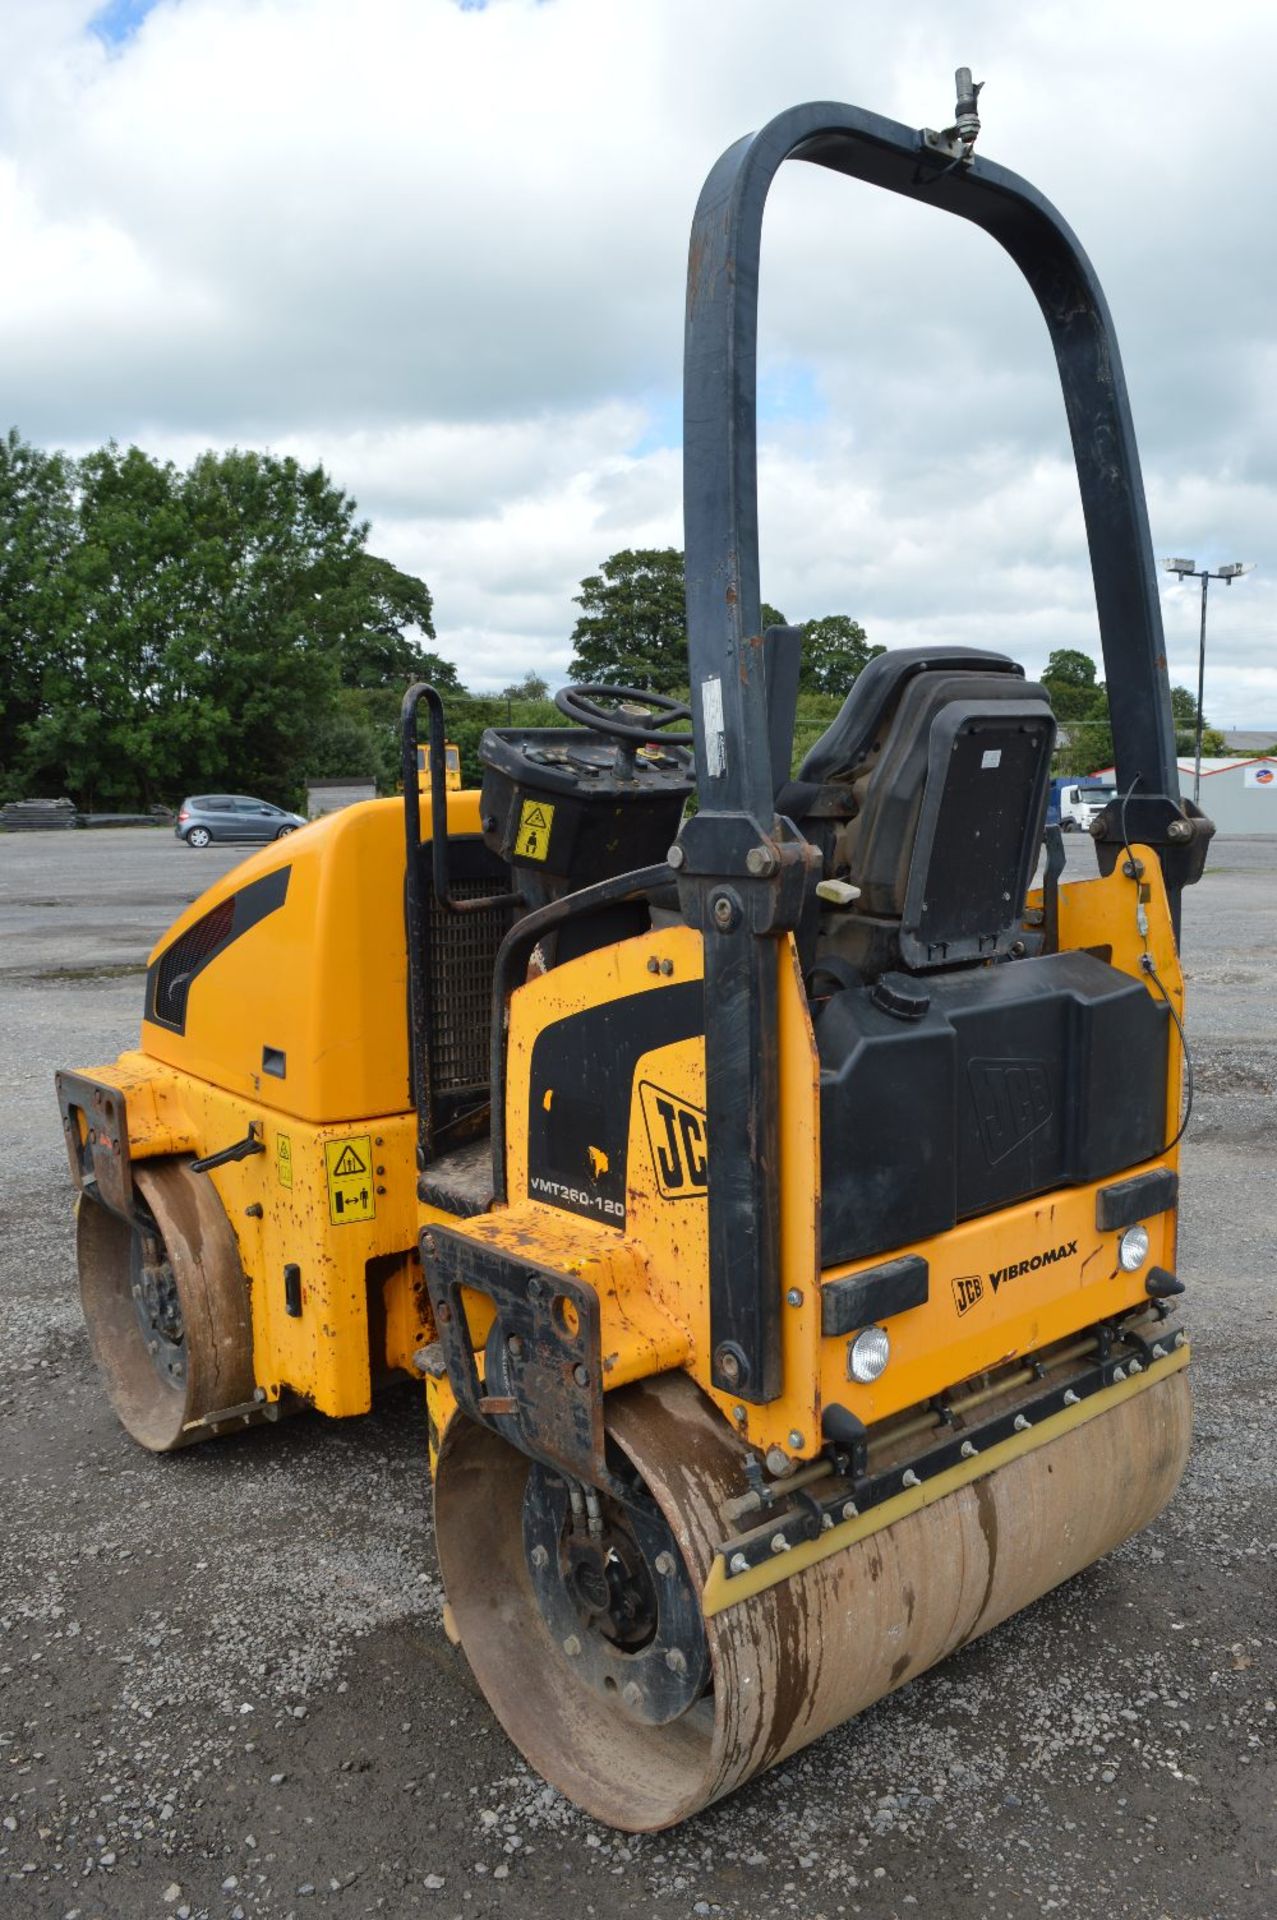 JCB VMT 260-120 double drum ride on roller
Year: 2007
S/N: 1700757
Recorded Hours: Not displayed - Image 4 of 7